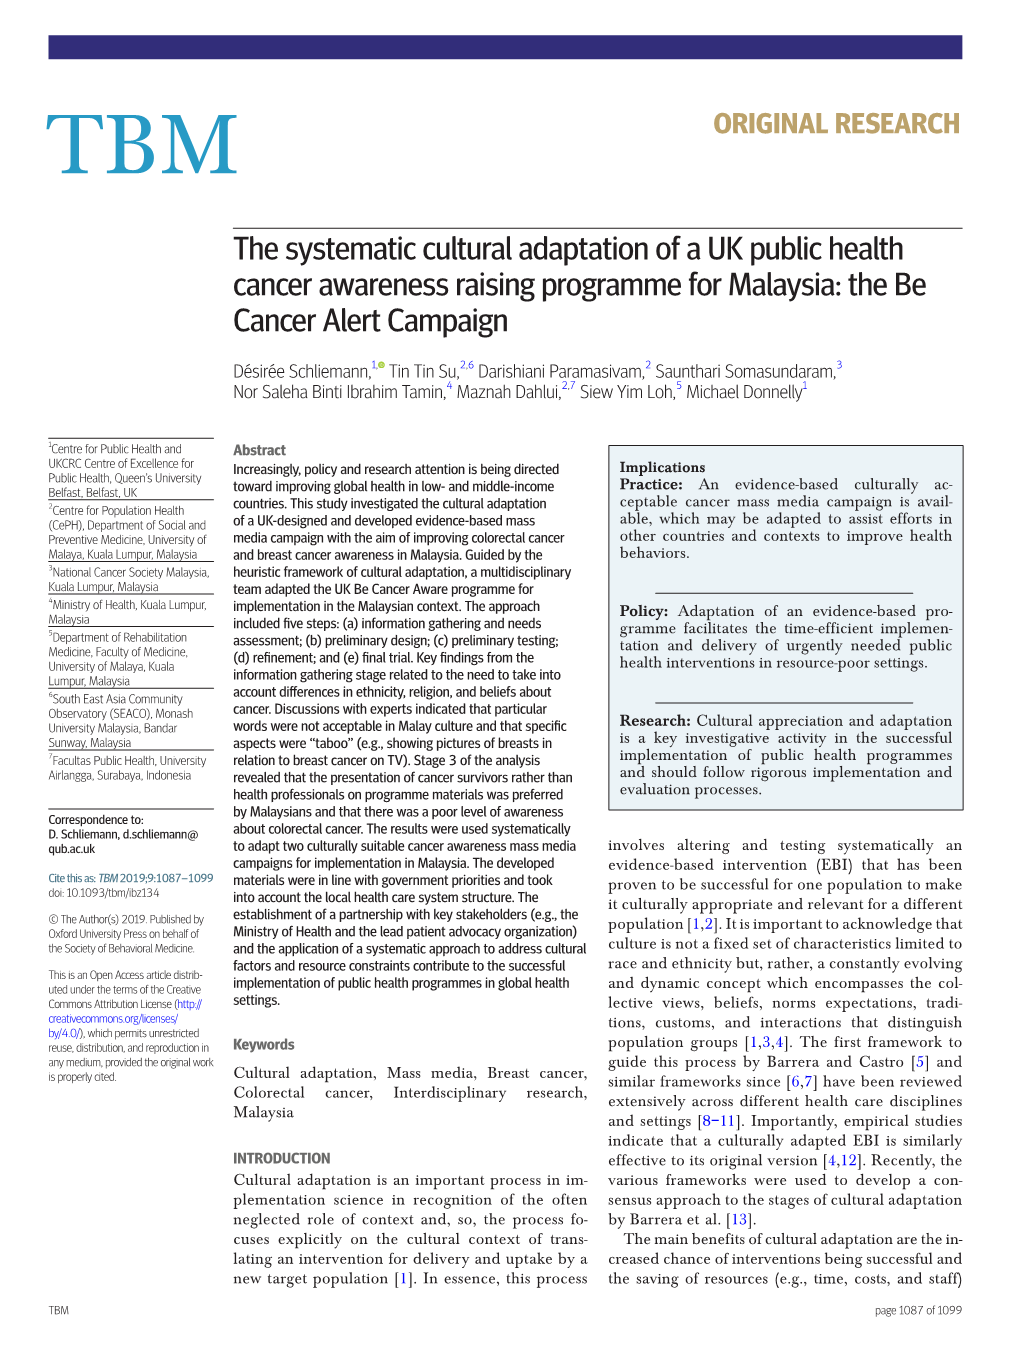 The Systematic Cultural Adaptation of a UK Public Health Cancer Awareness Raising Programme for Malaysia: the Be Cancer Alert Campaign